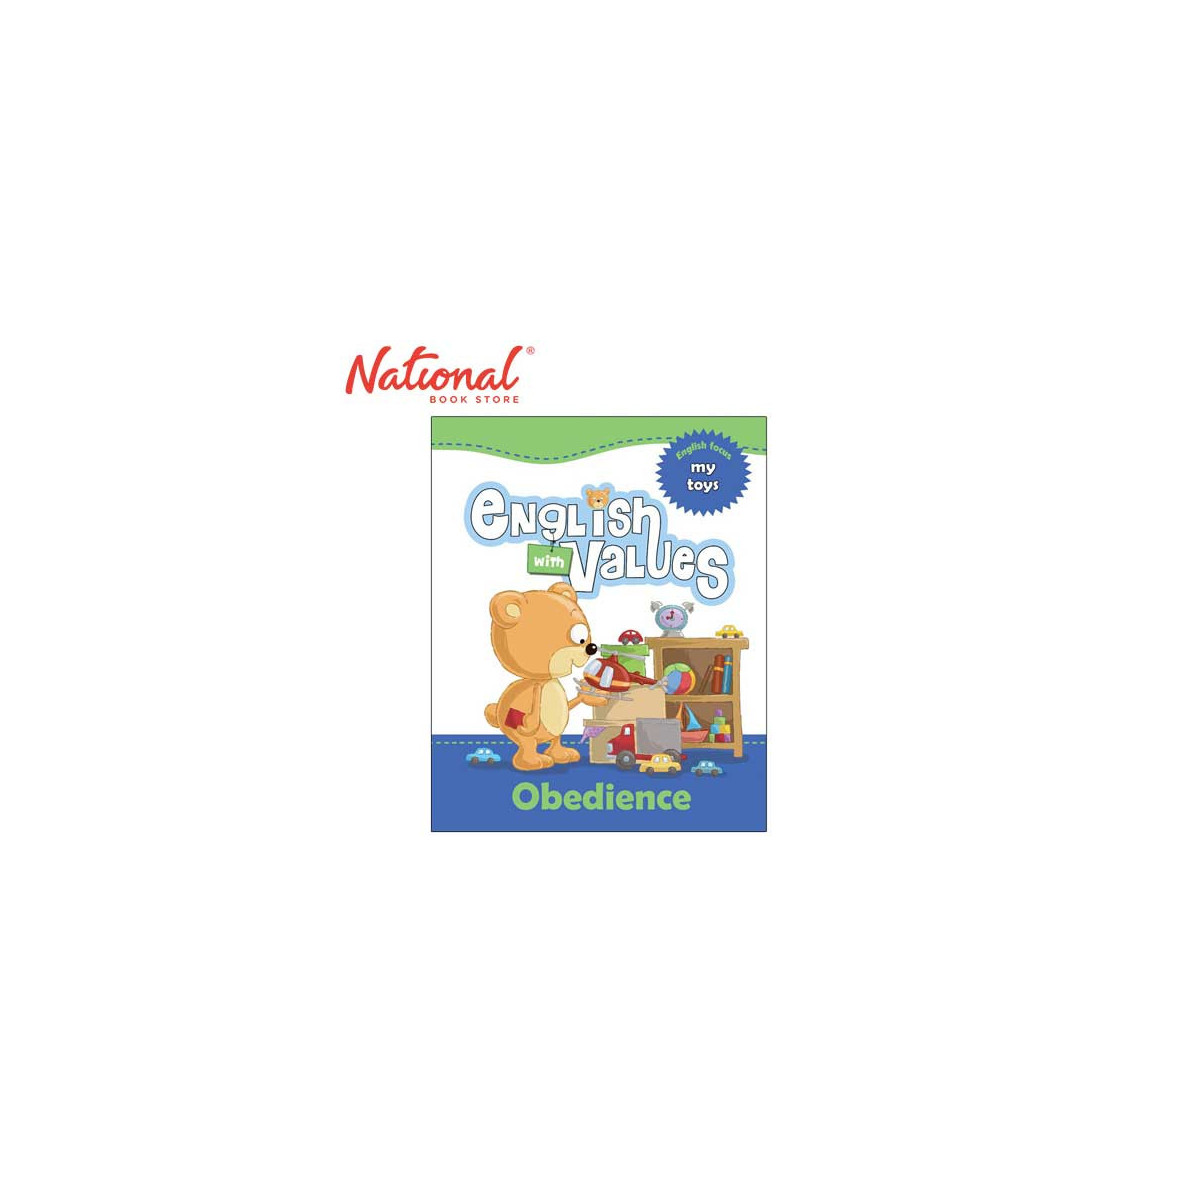 English With Values: Obedience - Trade Paperback - Activity Books for Kids